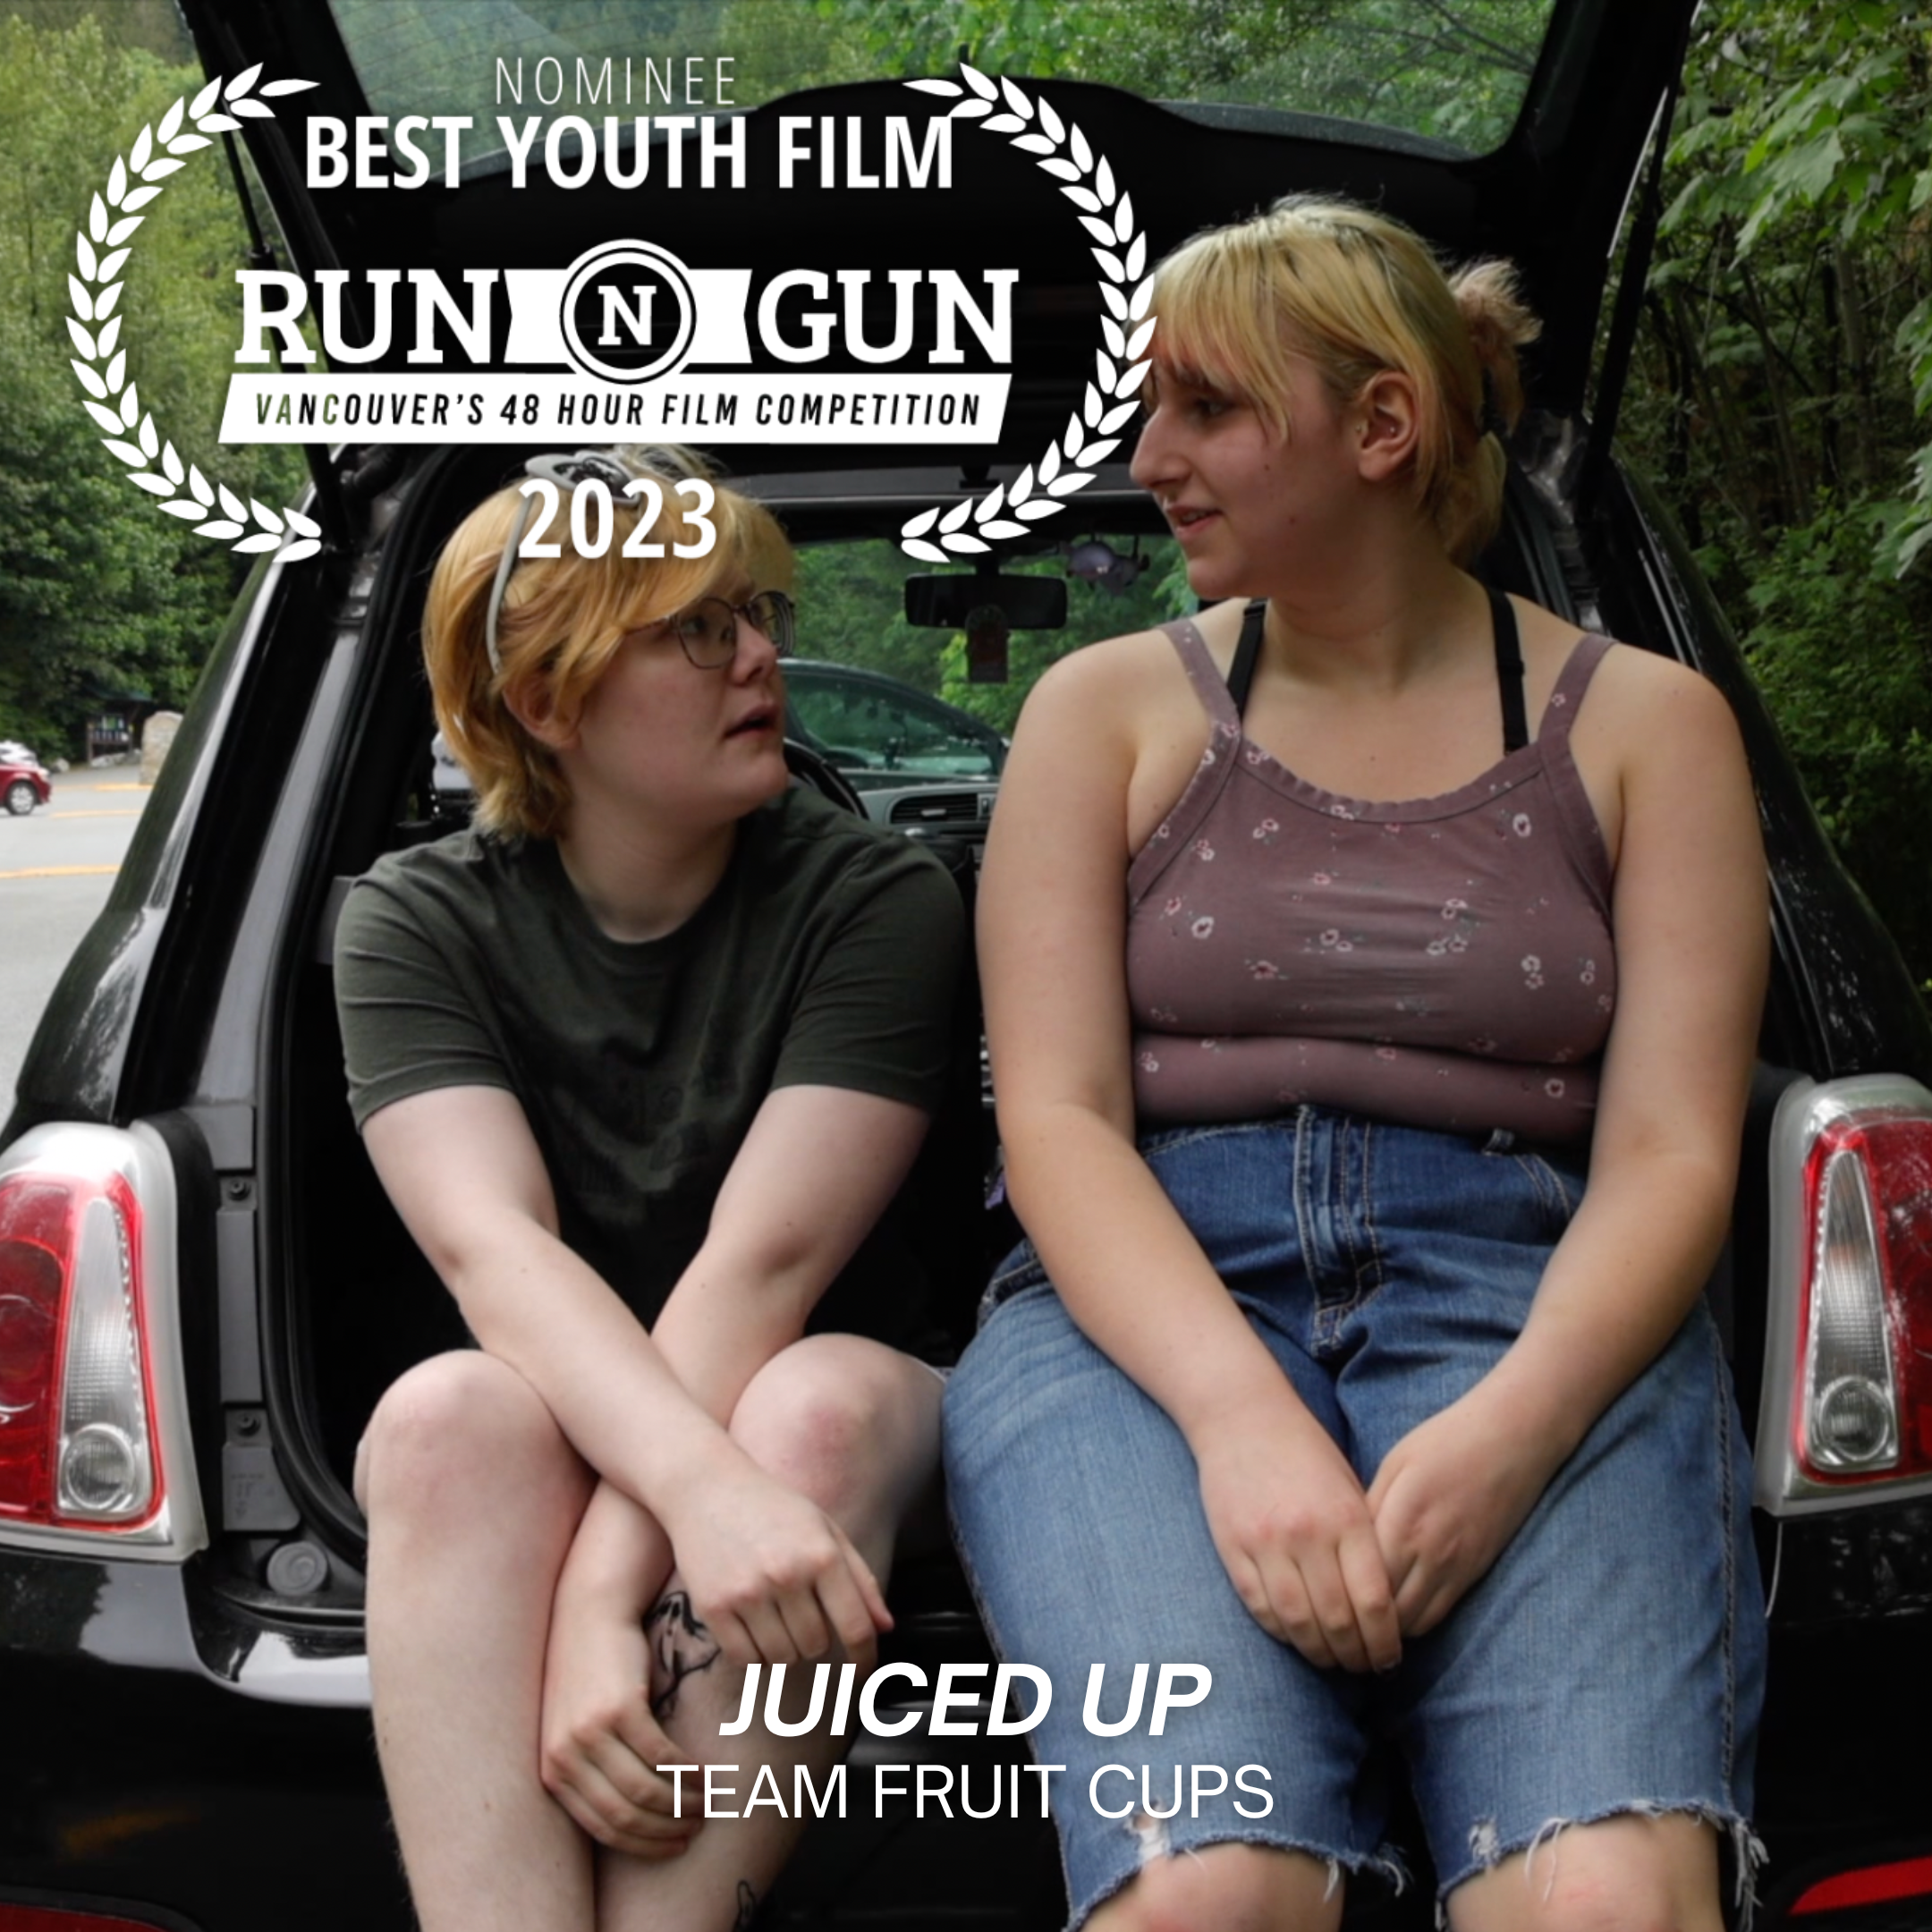 Best_Youth_Film_Nominees_5.png